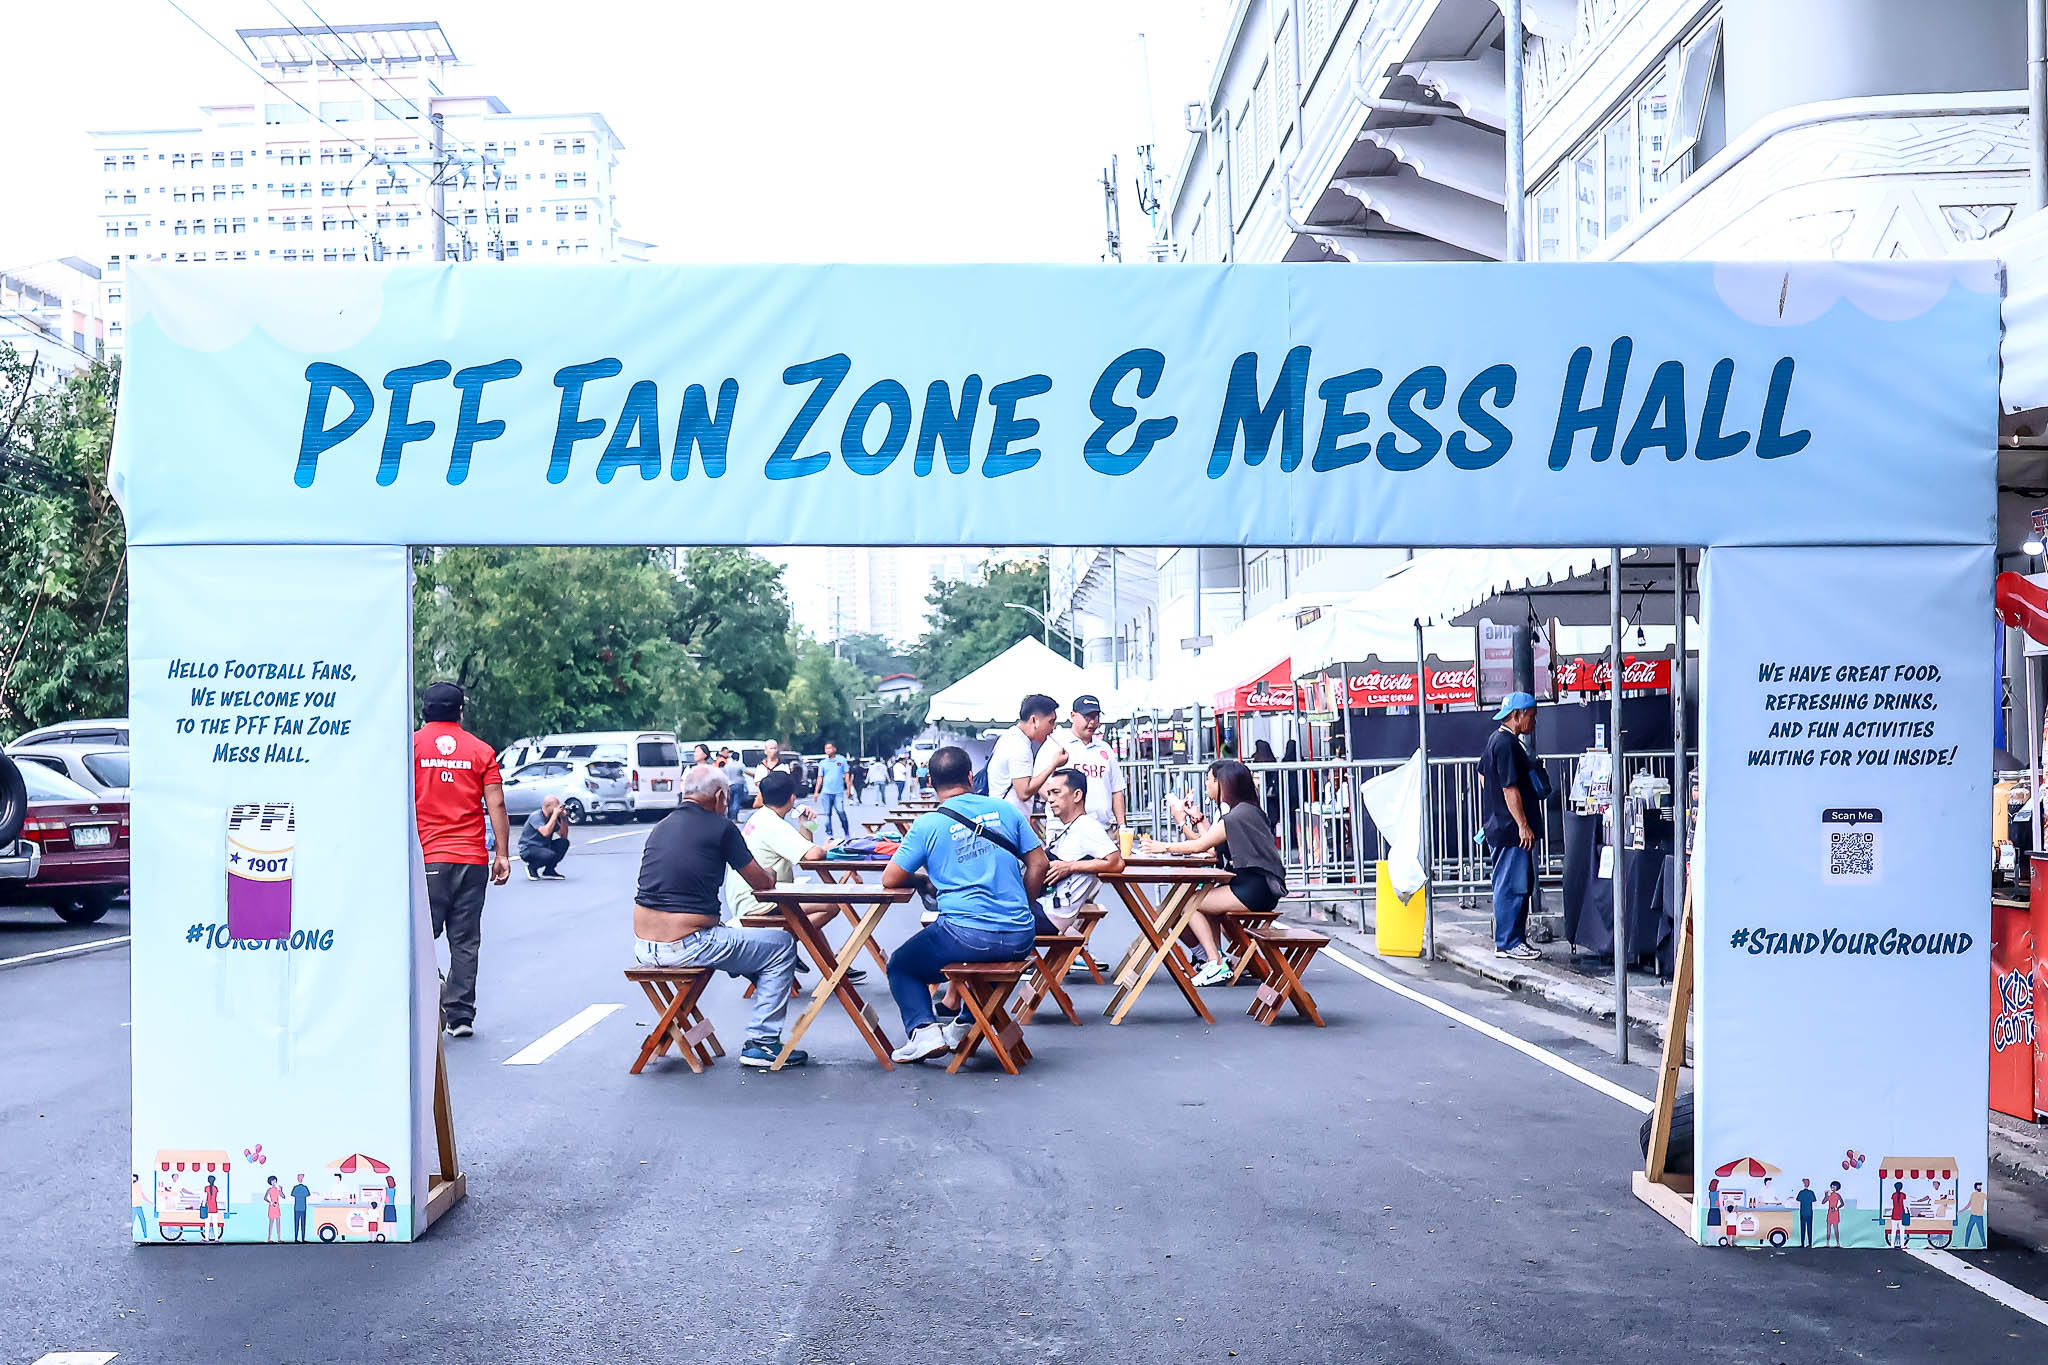 Philippine Football Federation Fan Zone and Mess Hall